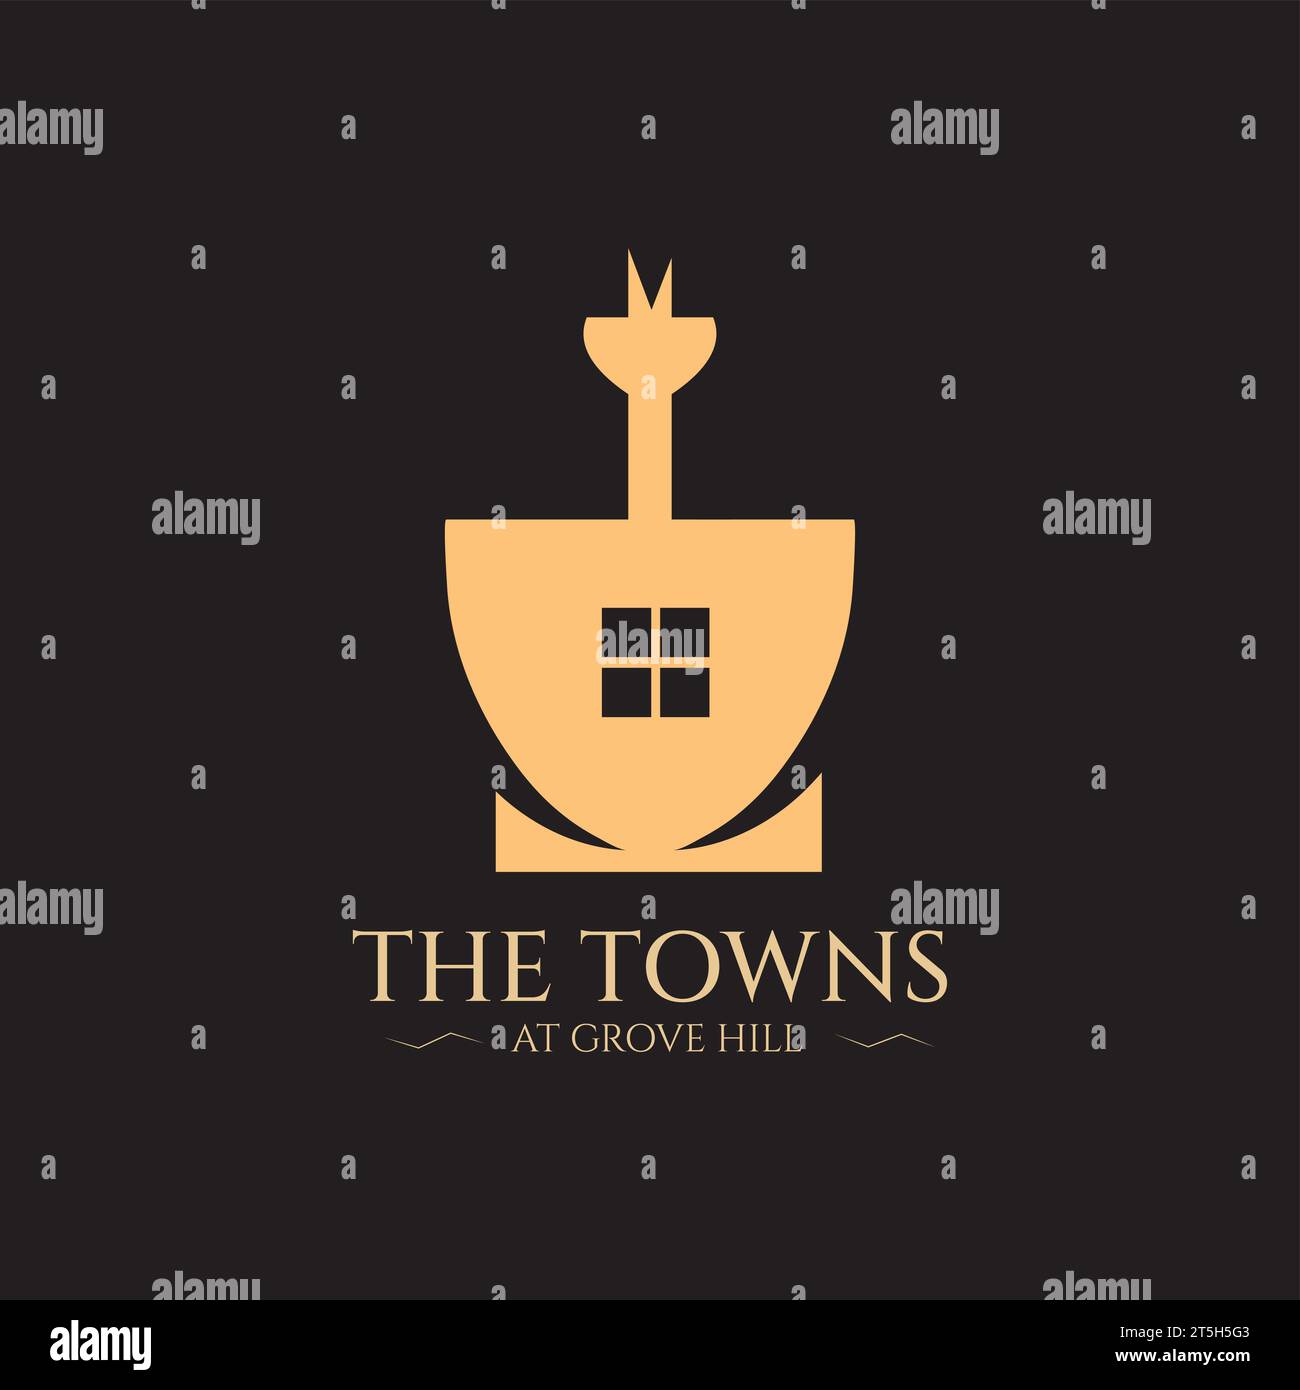 House Selling Agency Logo Design in the towns of Hilly Area Stock Vector